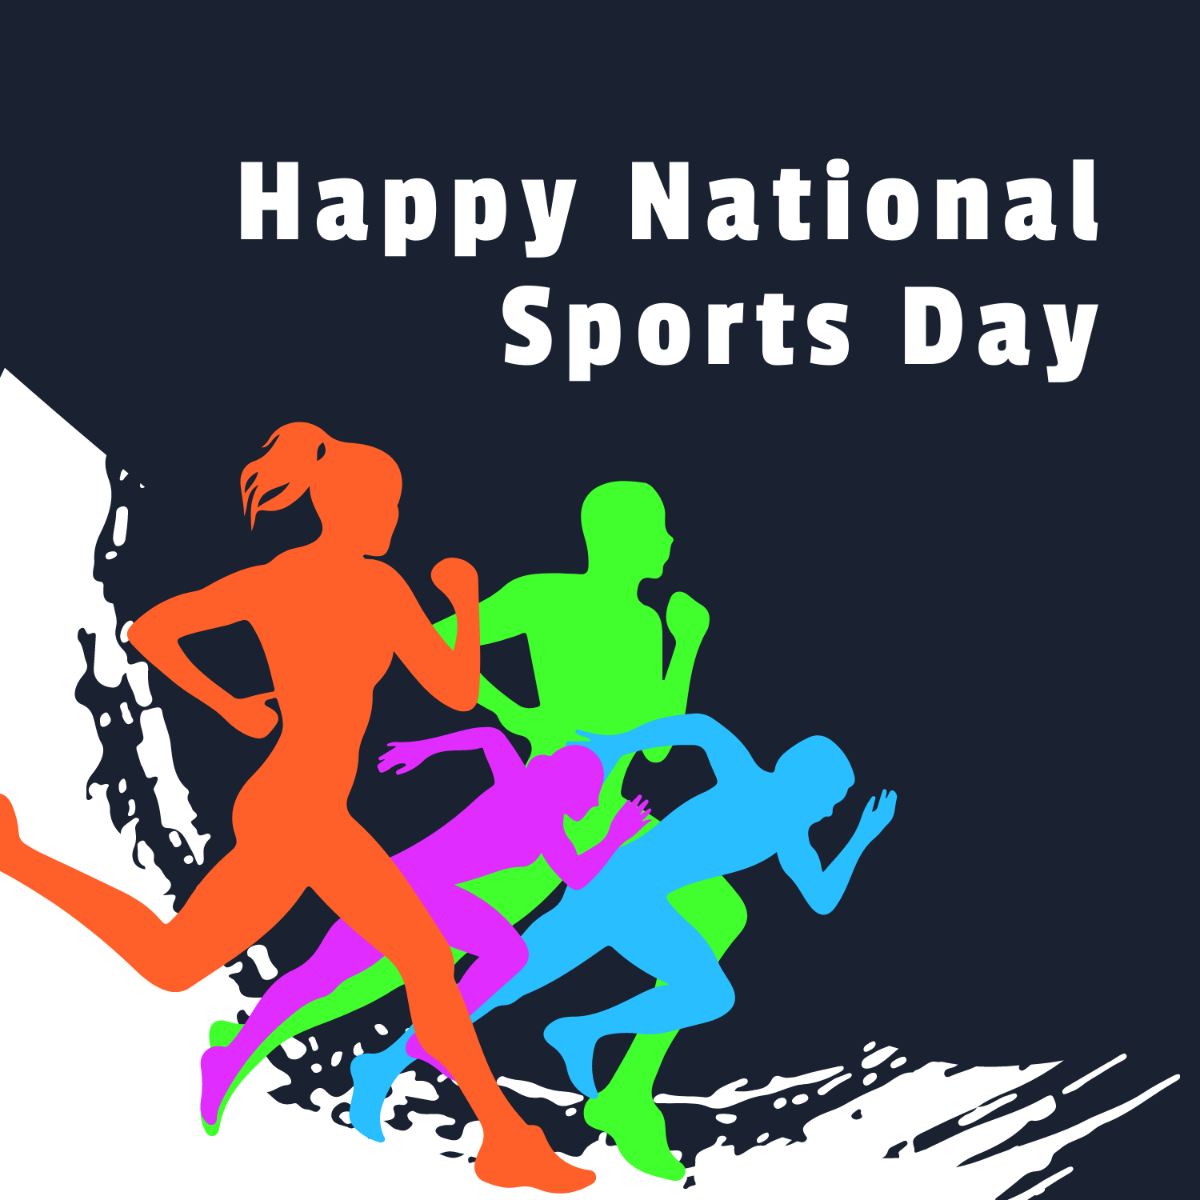 Free Happy National Sports Day Illustration Template